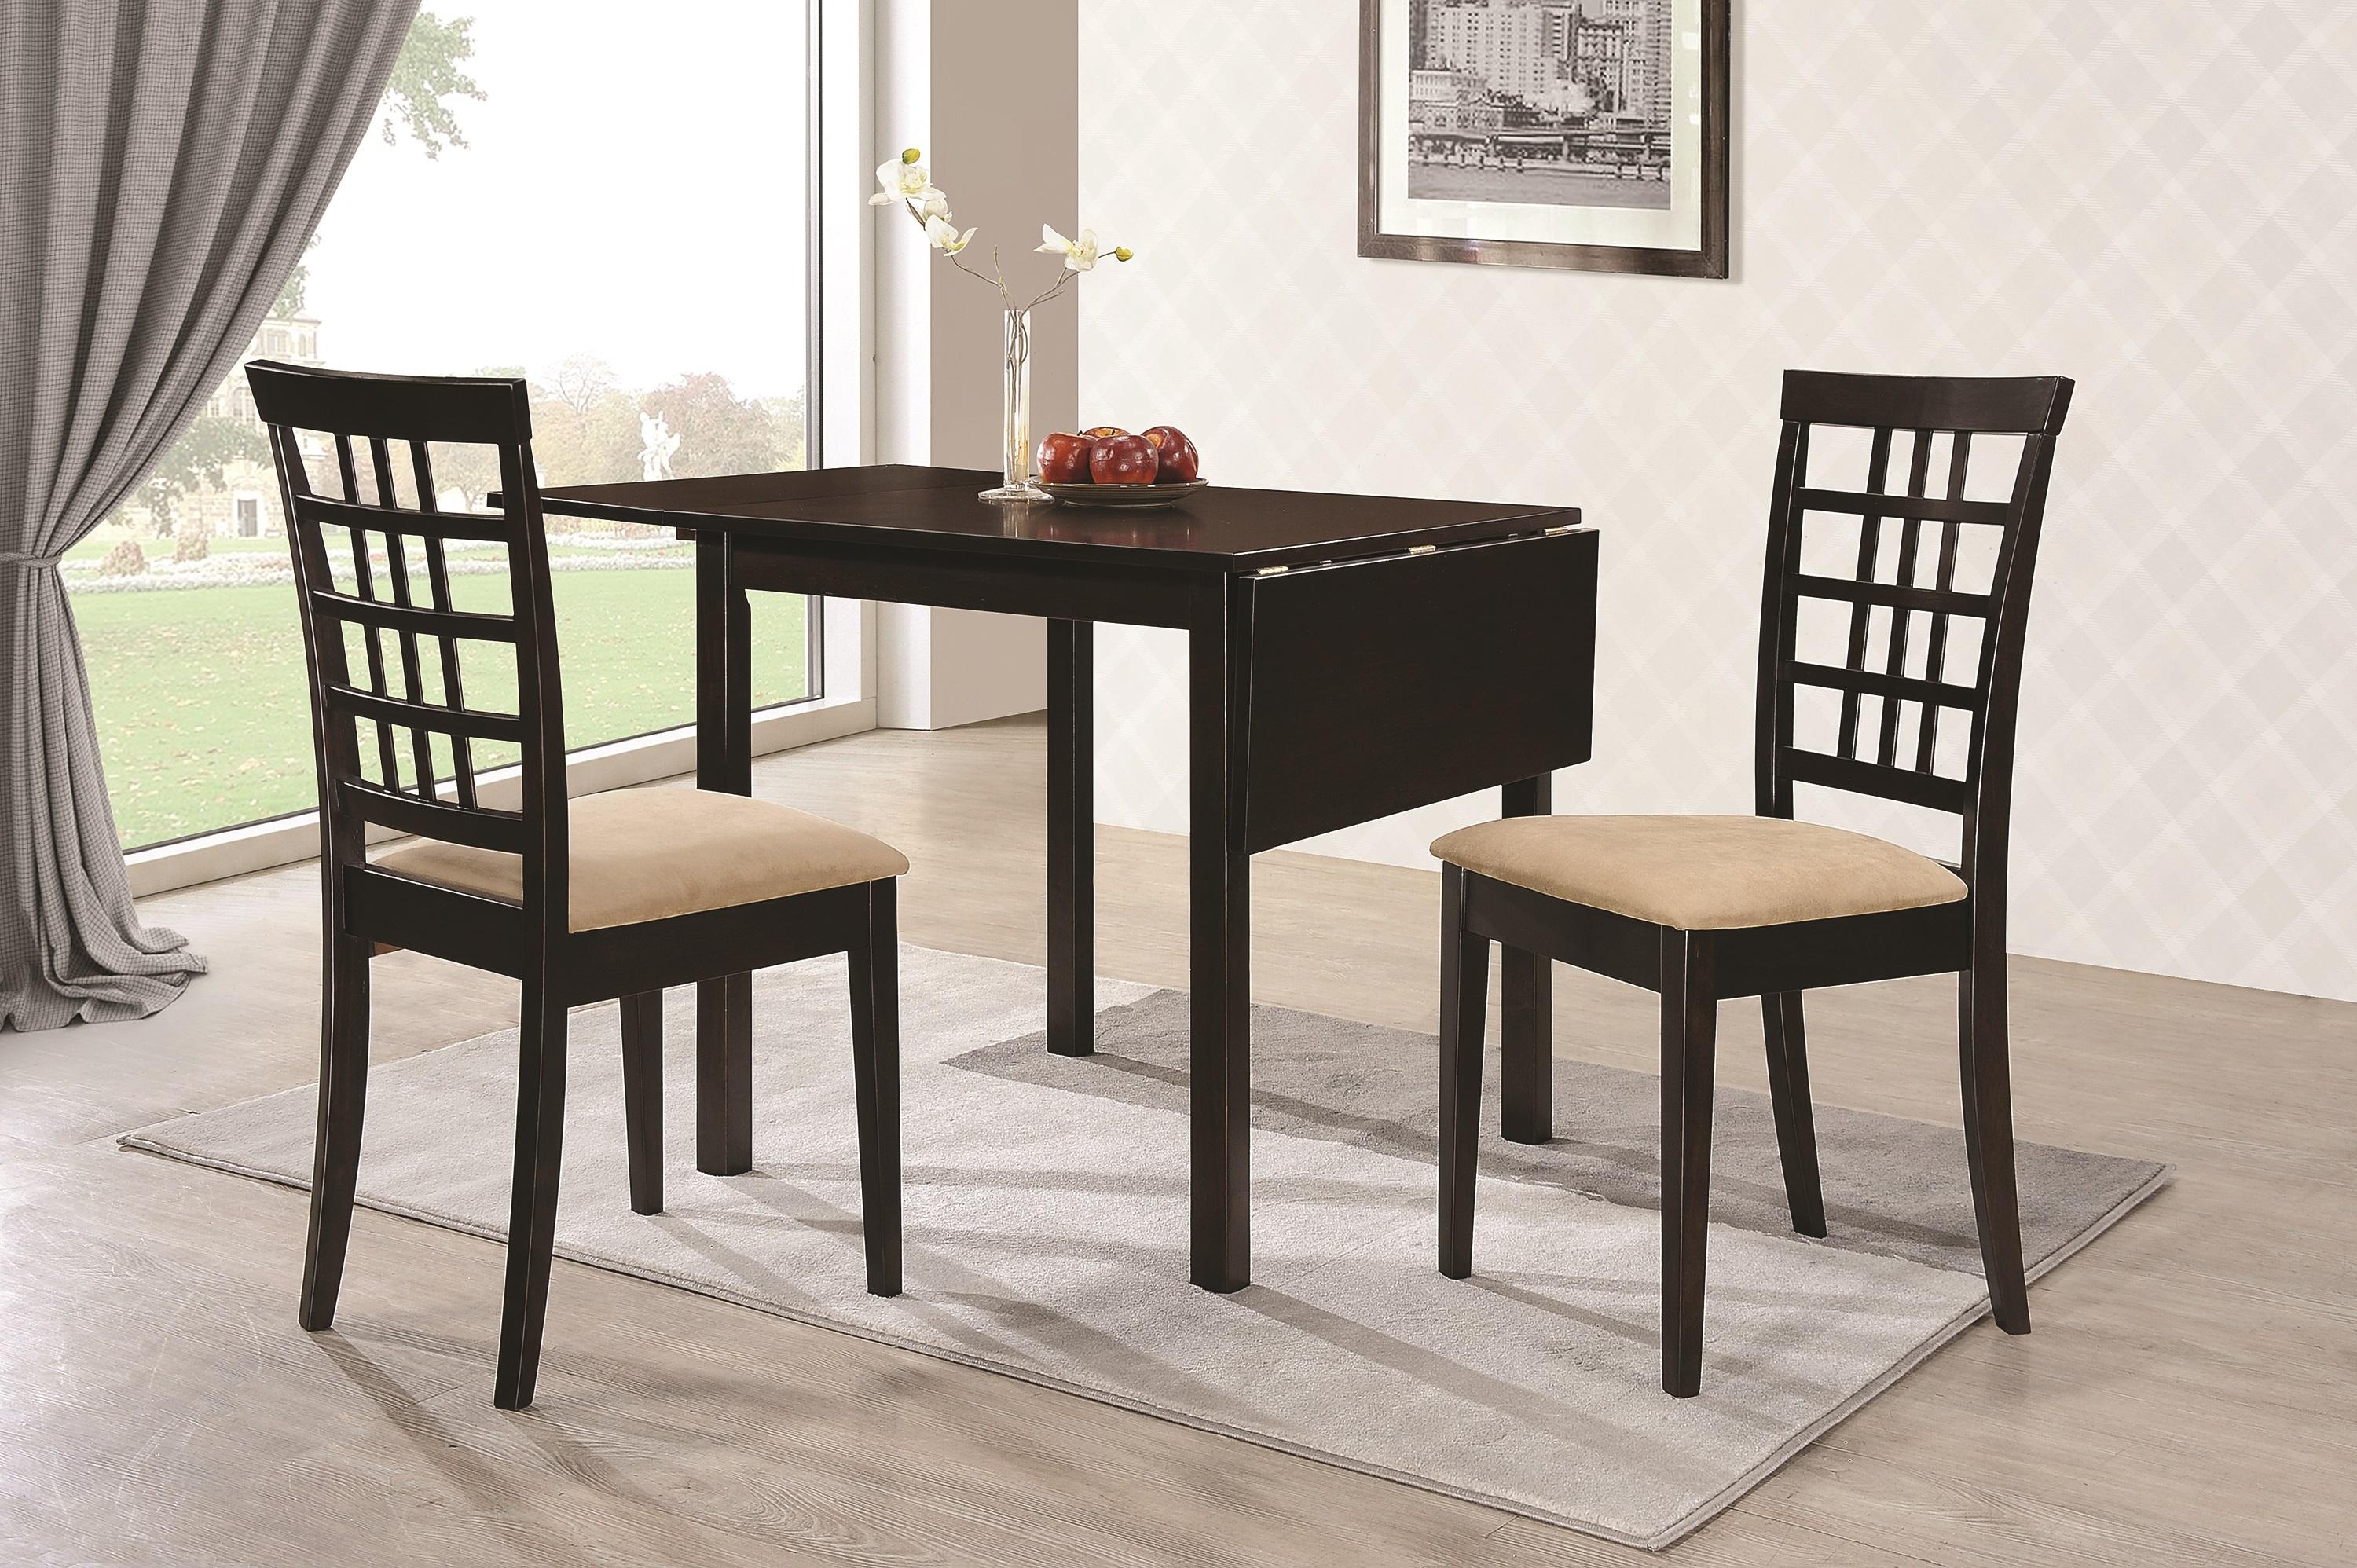 

    
Transitional Tan & Cappuccino Solid Wood Dining Room Set 3pcs Coaster 190821-S3 Kelso
